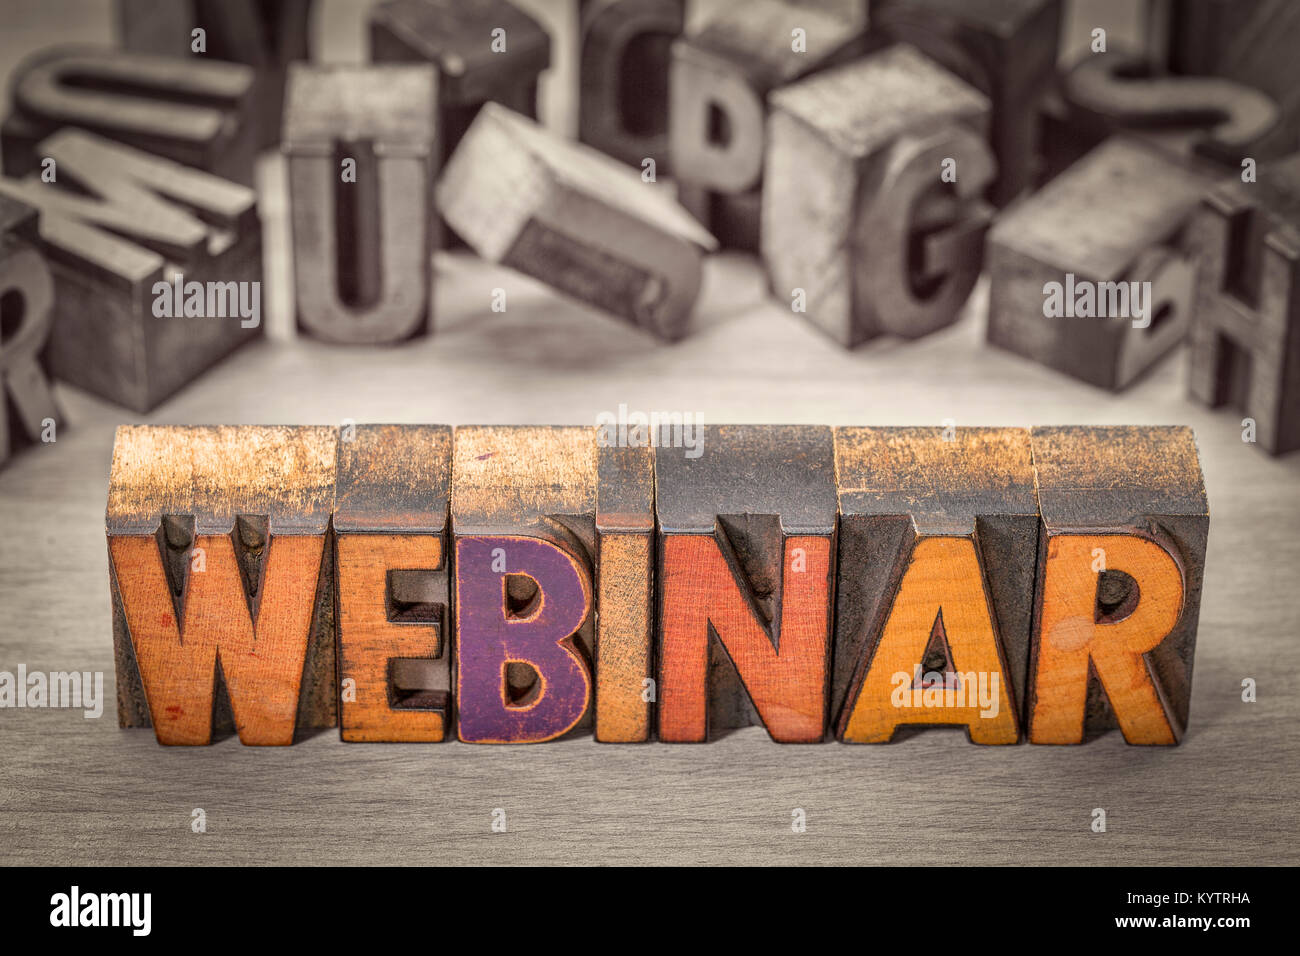 webinar banner  -  internet communication concept - a word abstract  in letterpress wood type printing blocks, color combined with black and white ima Stock Photo